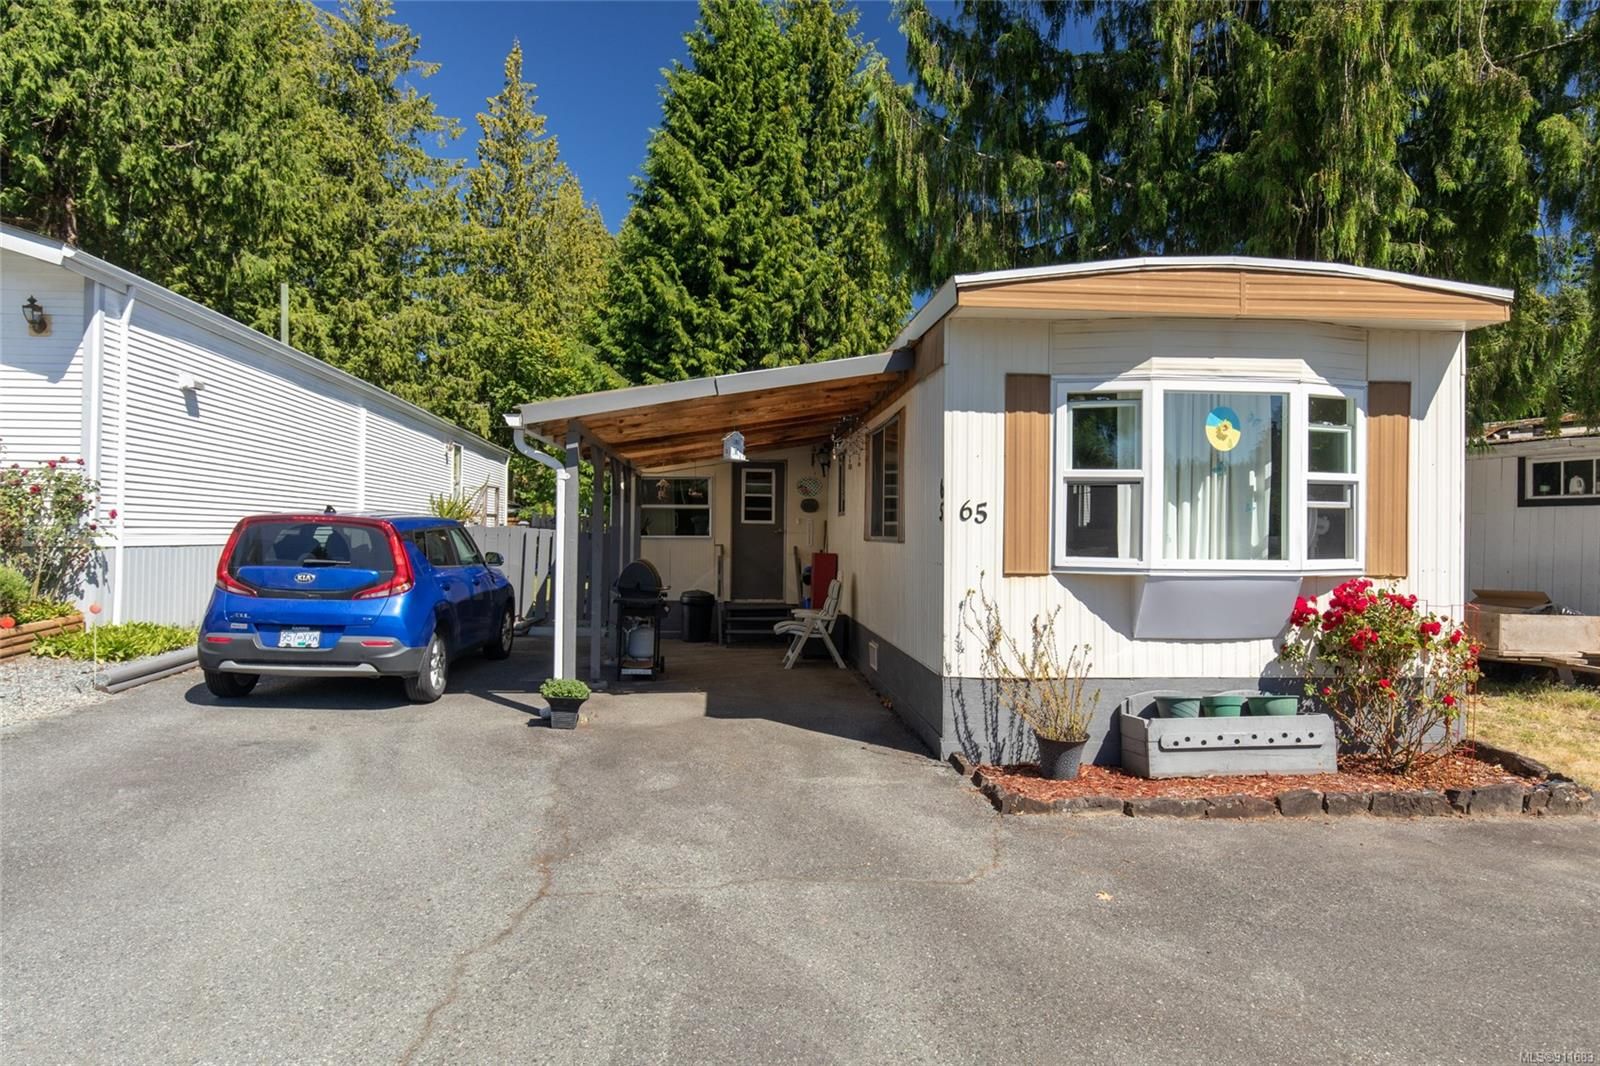 I have sold a property at 65 25 Maki Rd in Nanaimo
